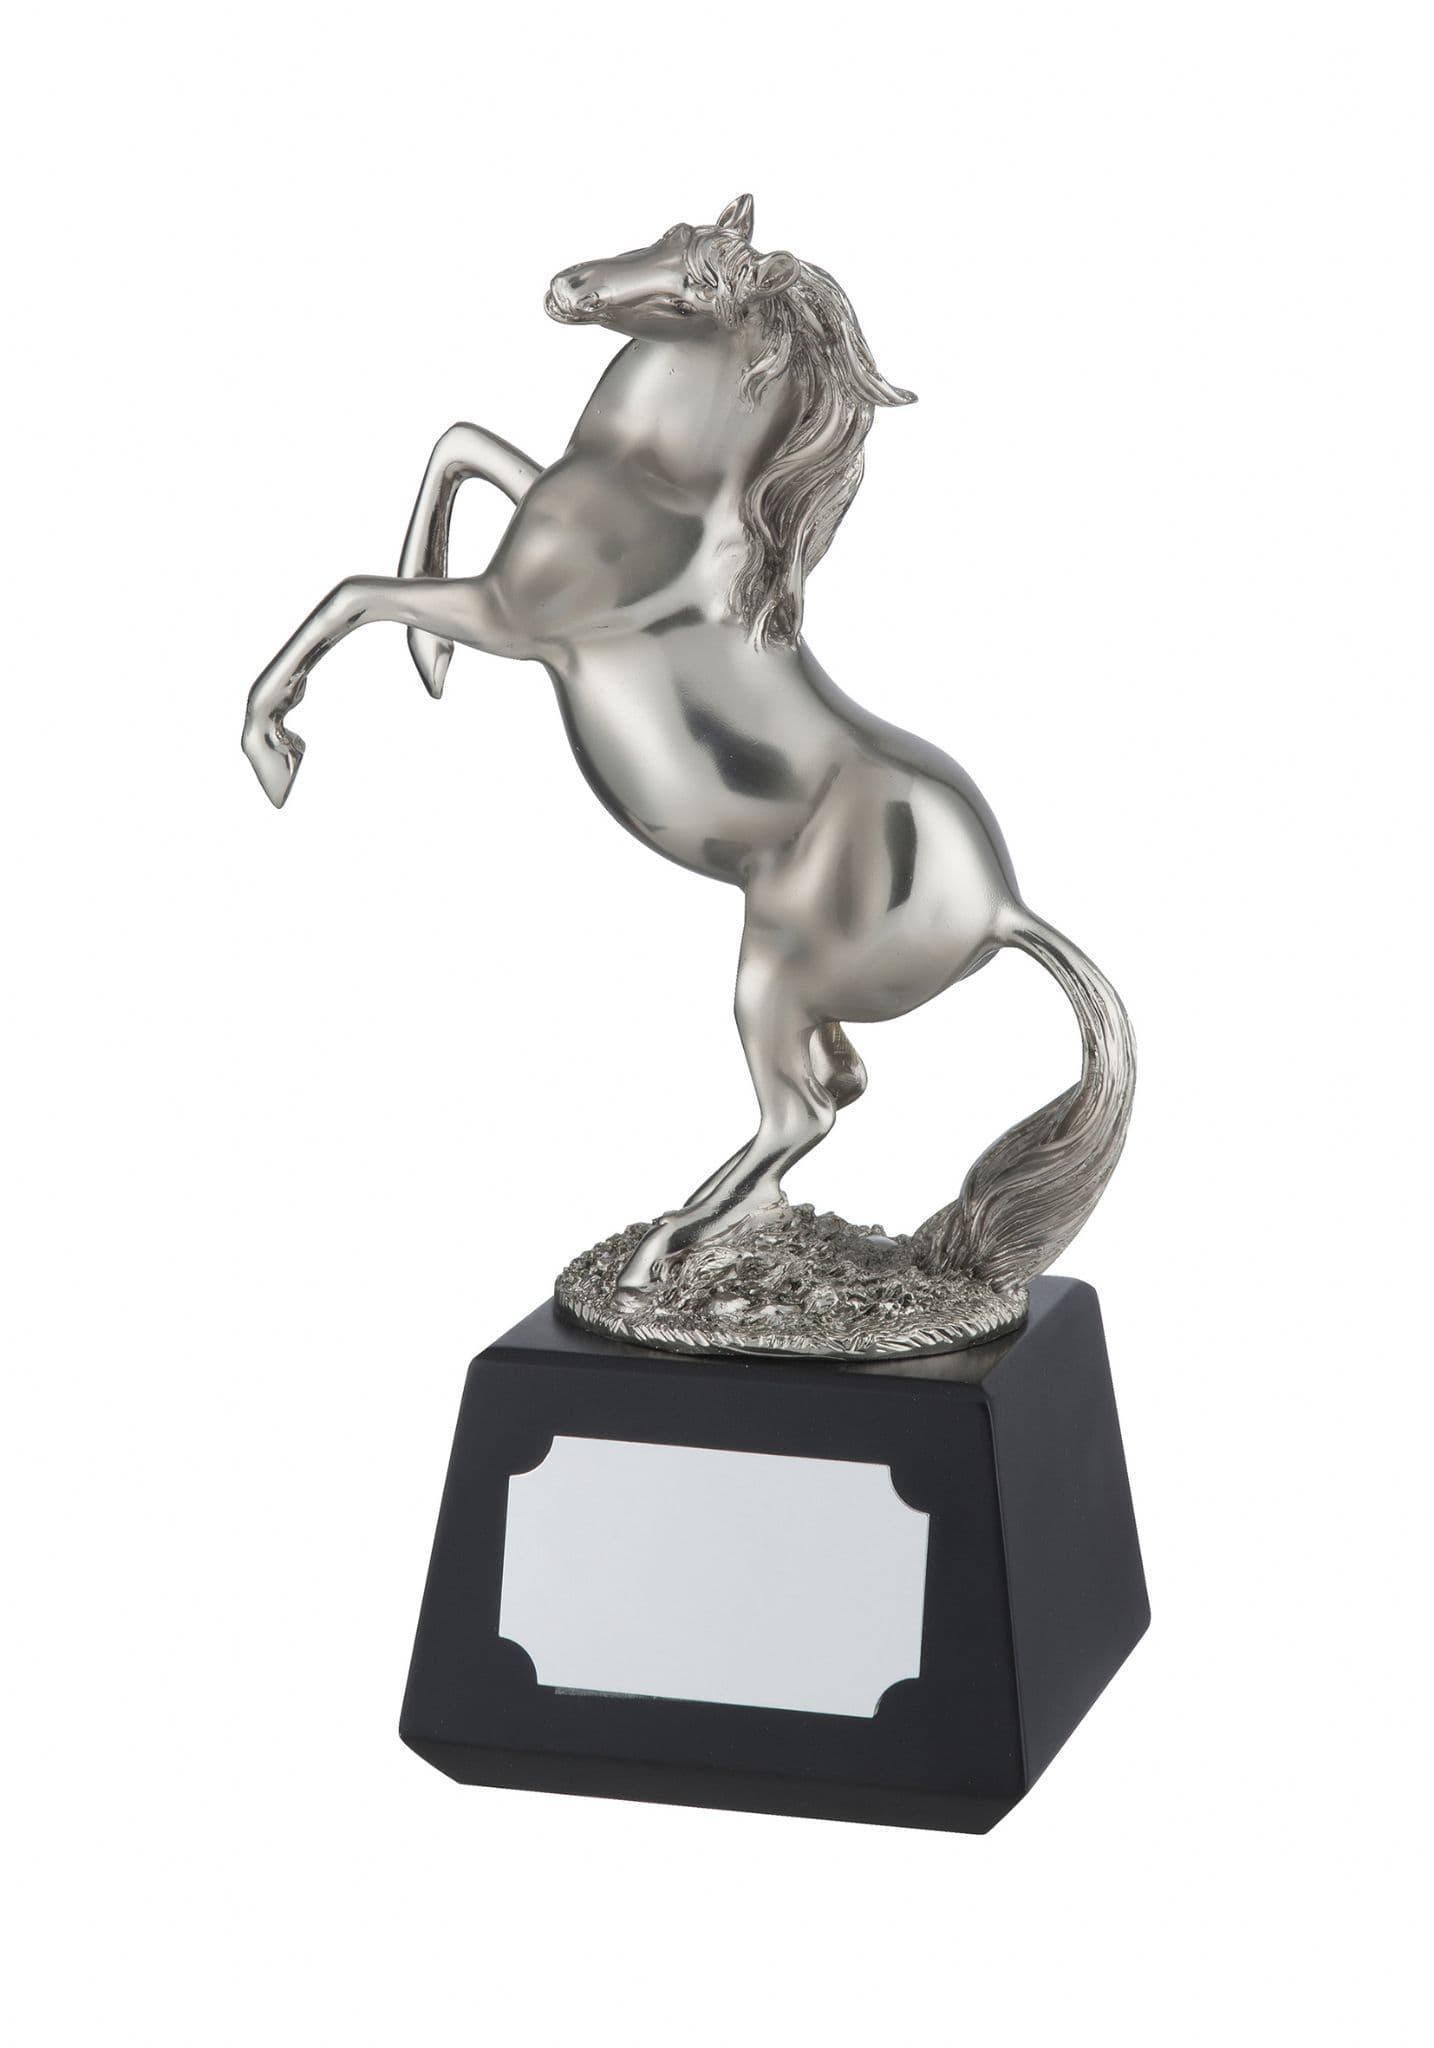 SILVER FINISH REARING HORSE